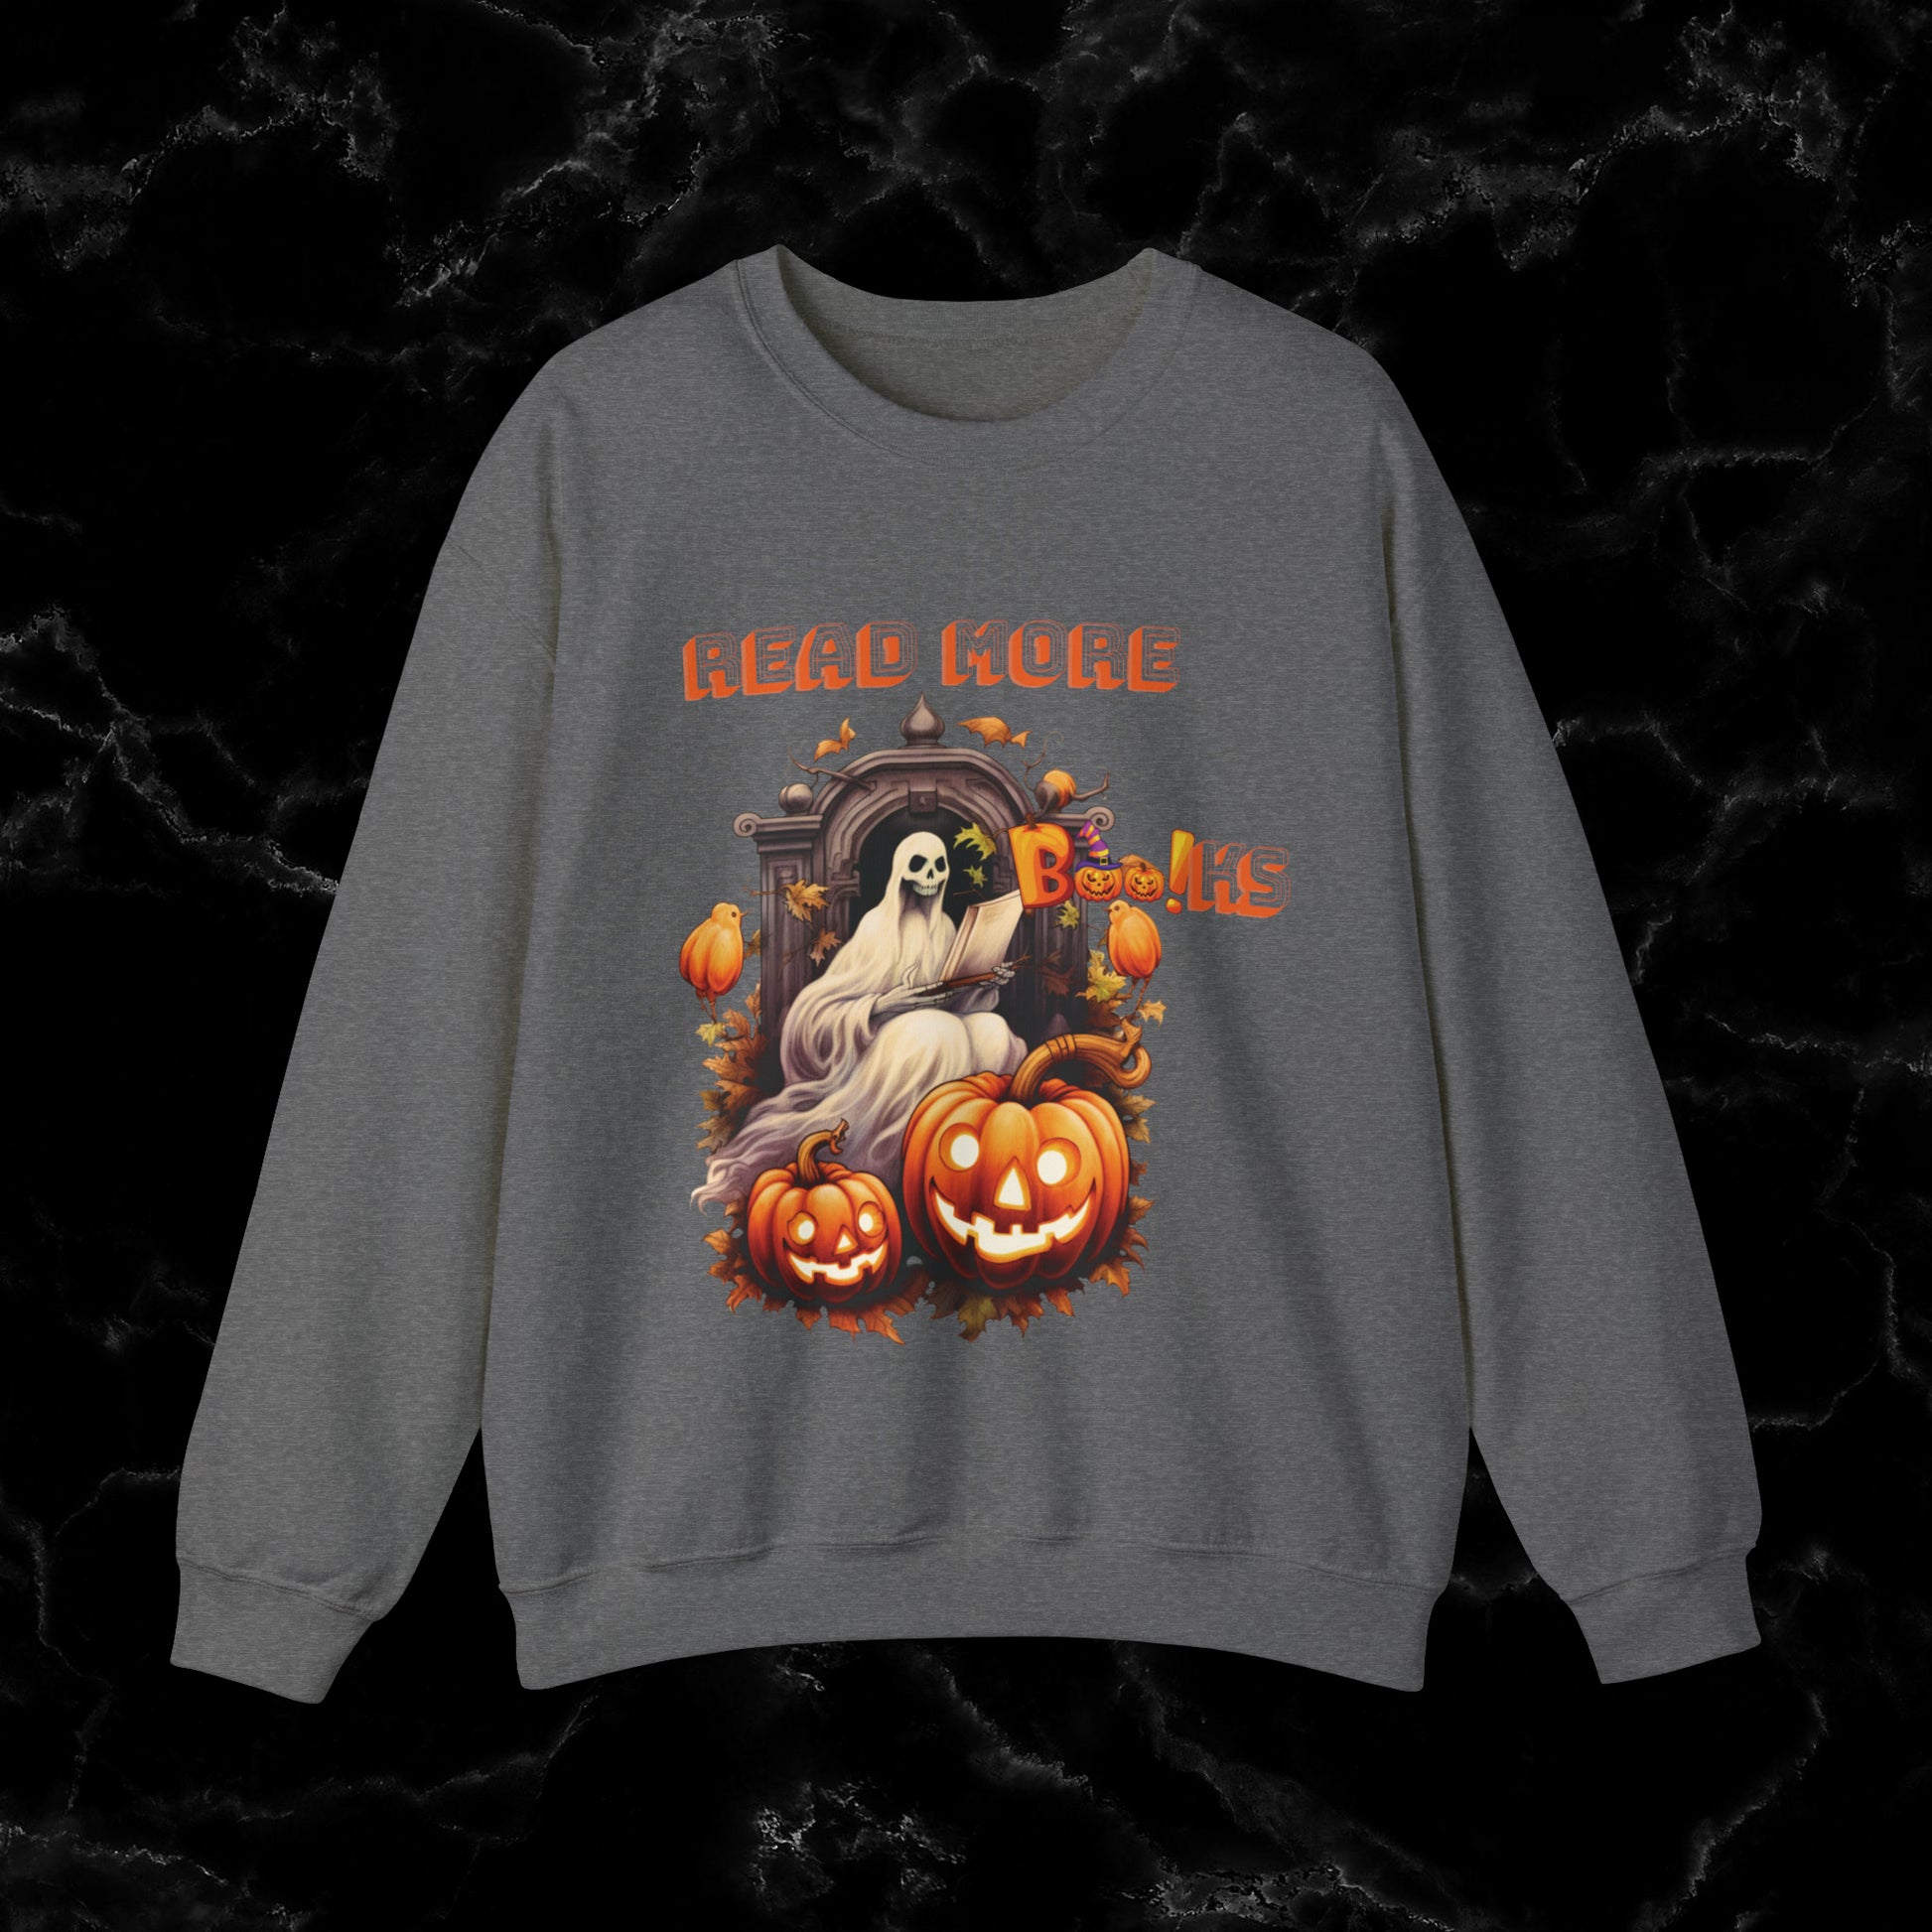 Read More Books Sweatshirt - Book Lover Halloween Sweater for Librarians and Students Sweatshirt S Graphite Heather 